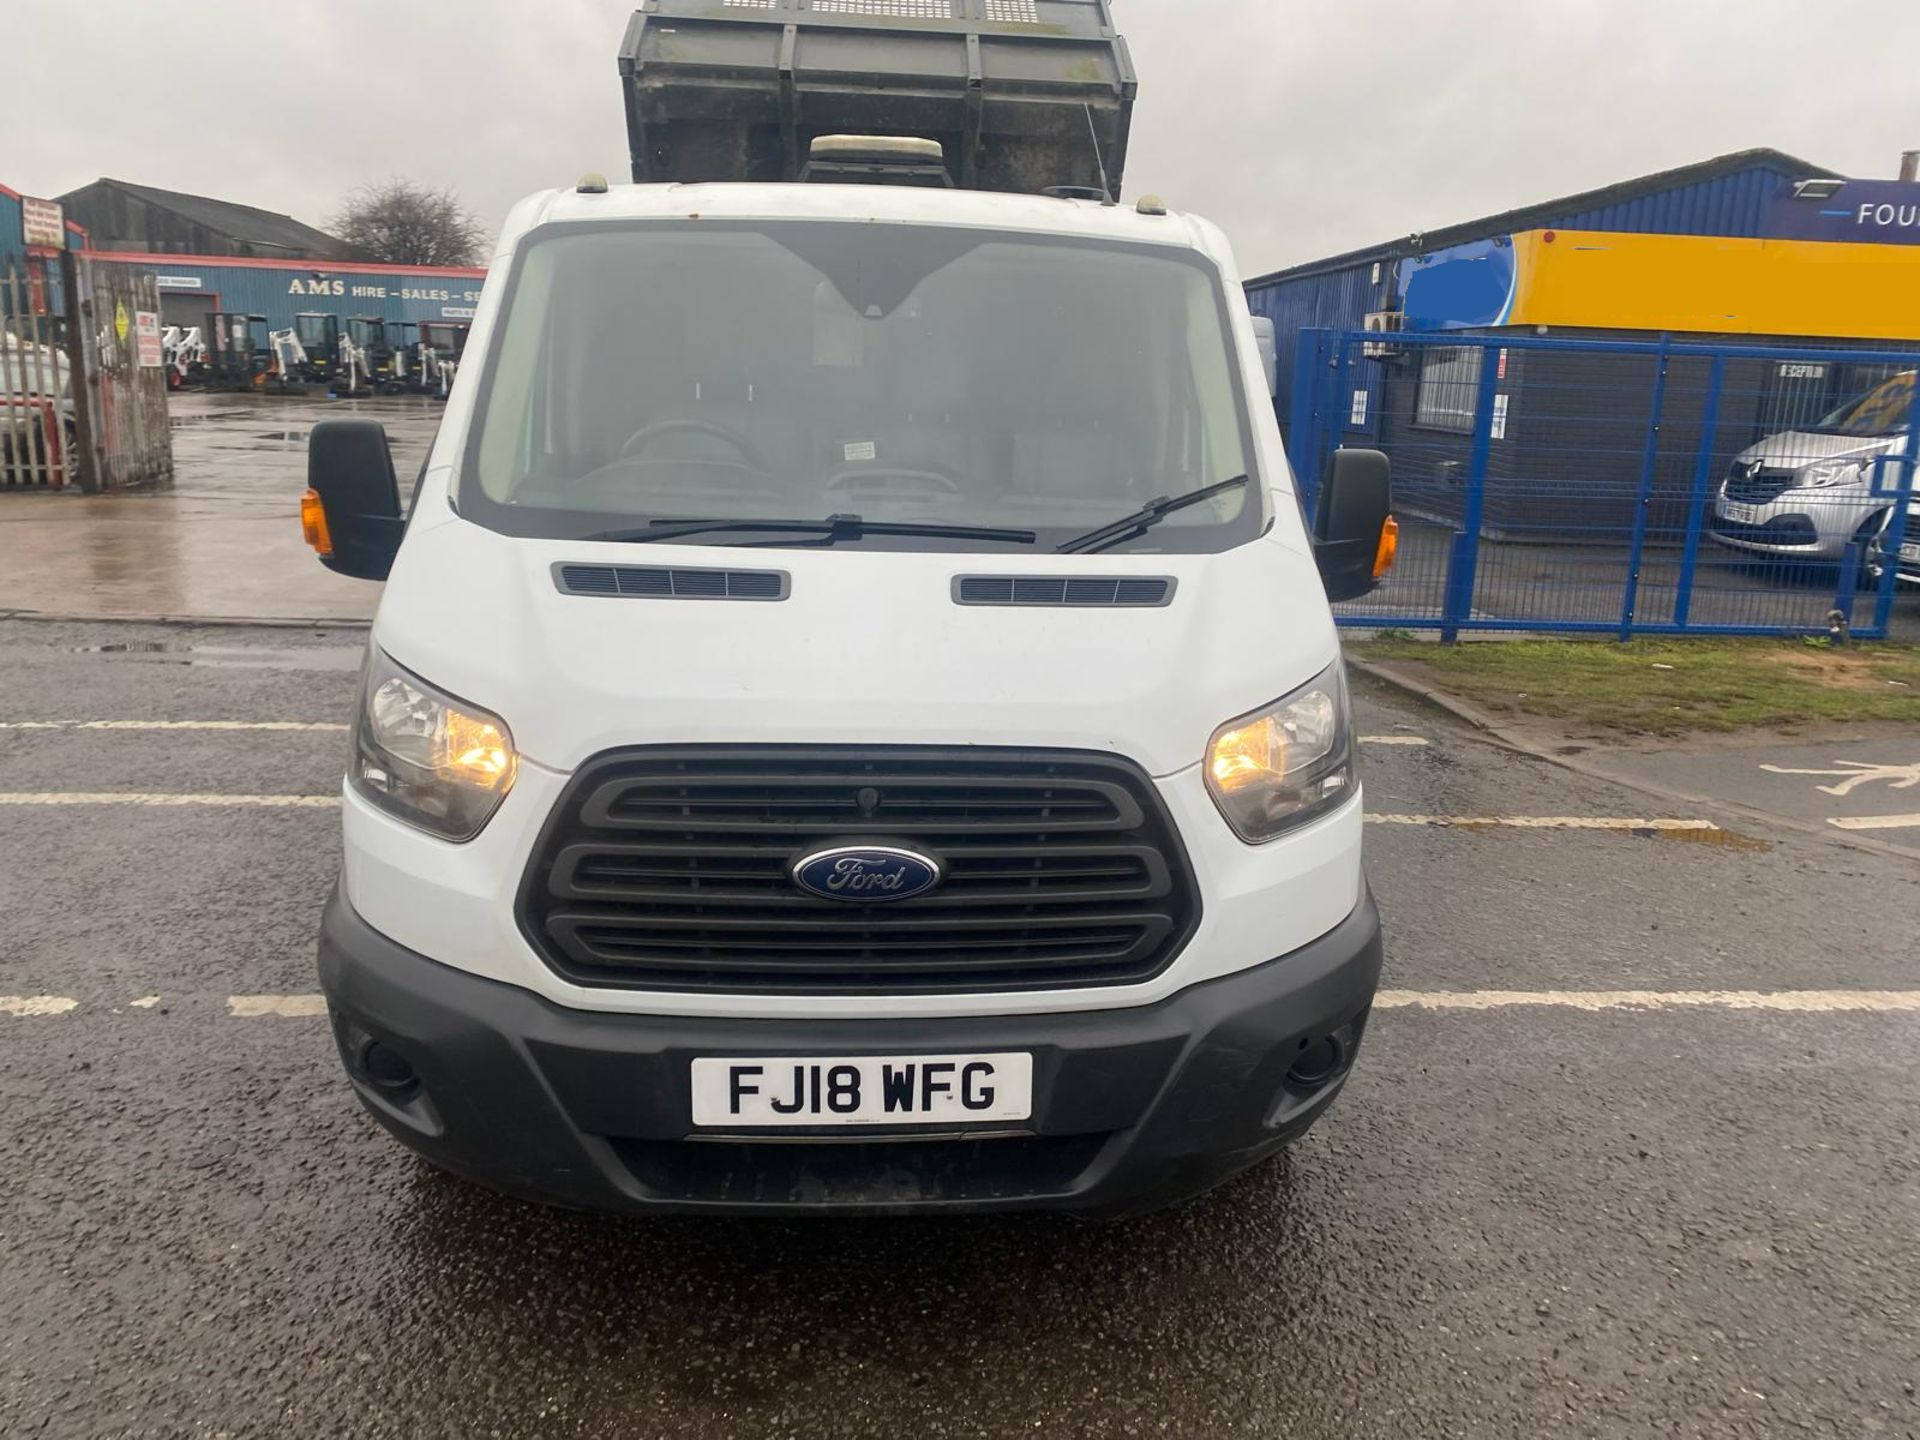 2018 18 FORD TRANSIT 470 TIPPER - 90K MILES - 4.7 TON GROSS - 3 SEATS - RARE TIPPER - TOWBAR - Image 7 of 15